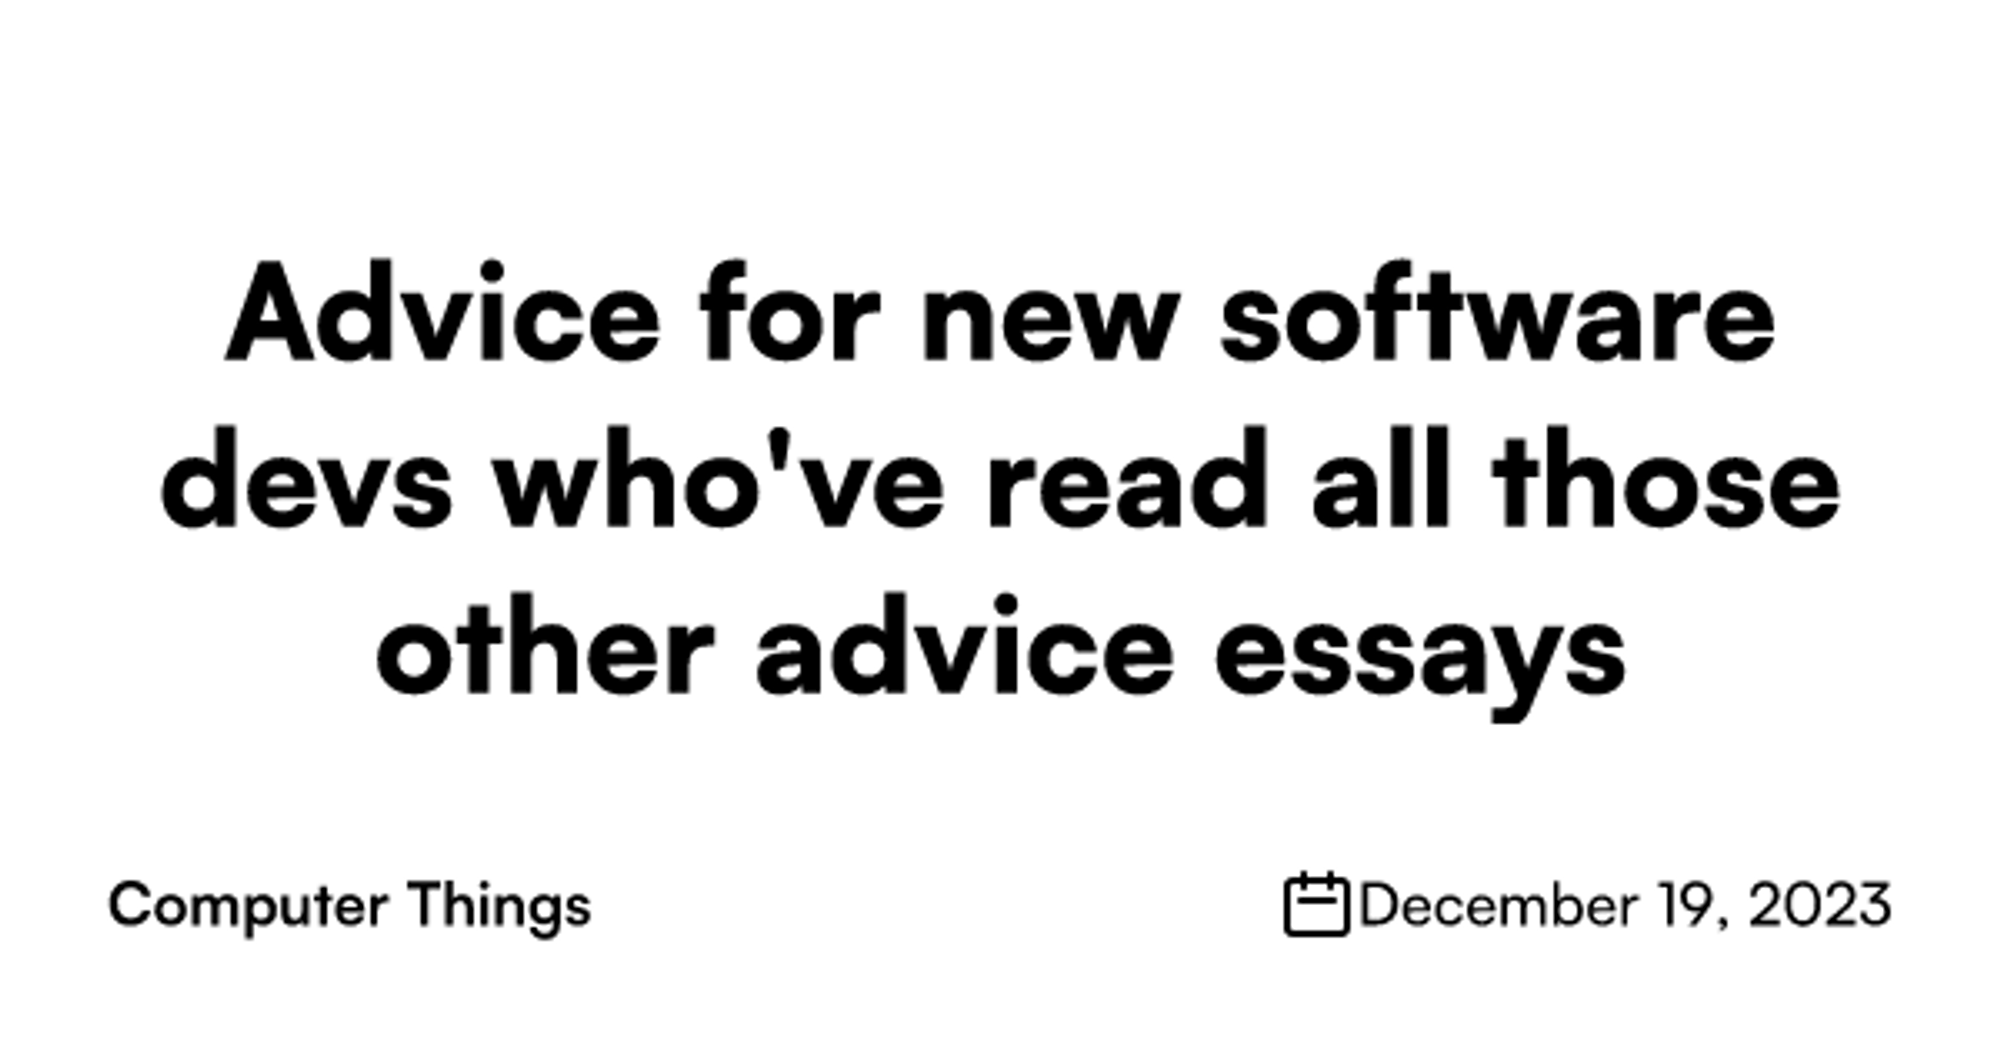 Advice for new software devs who've read all those other advice essays